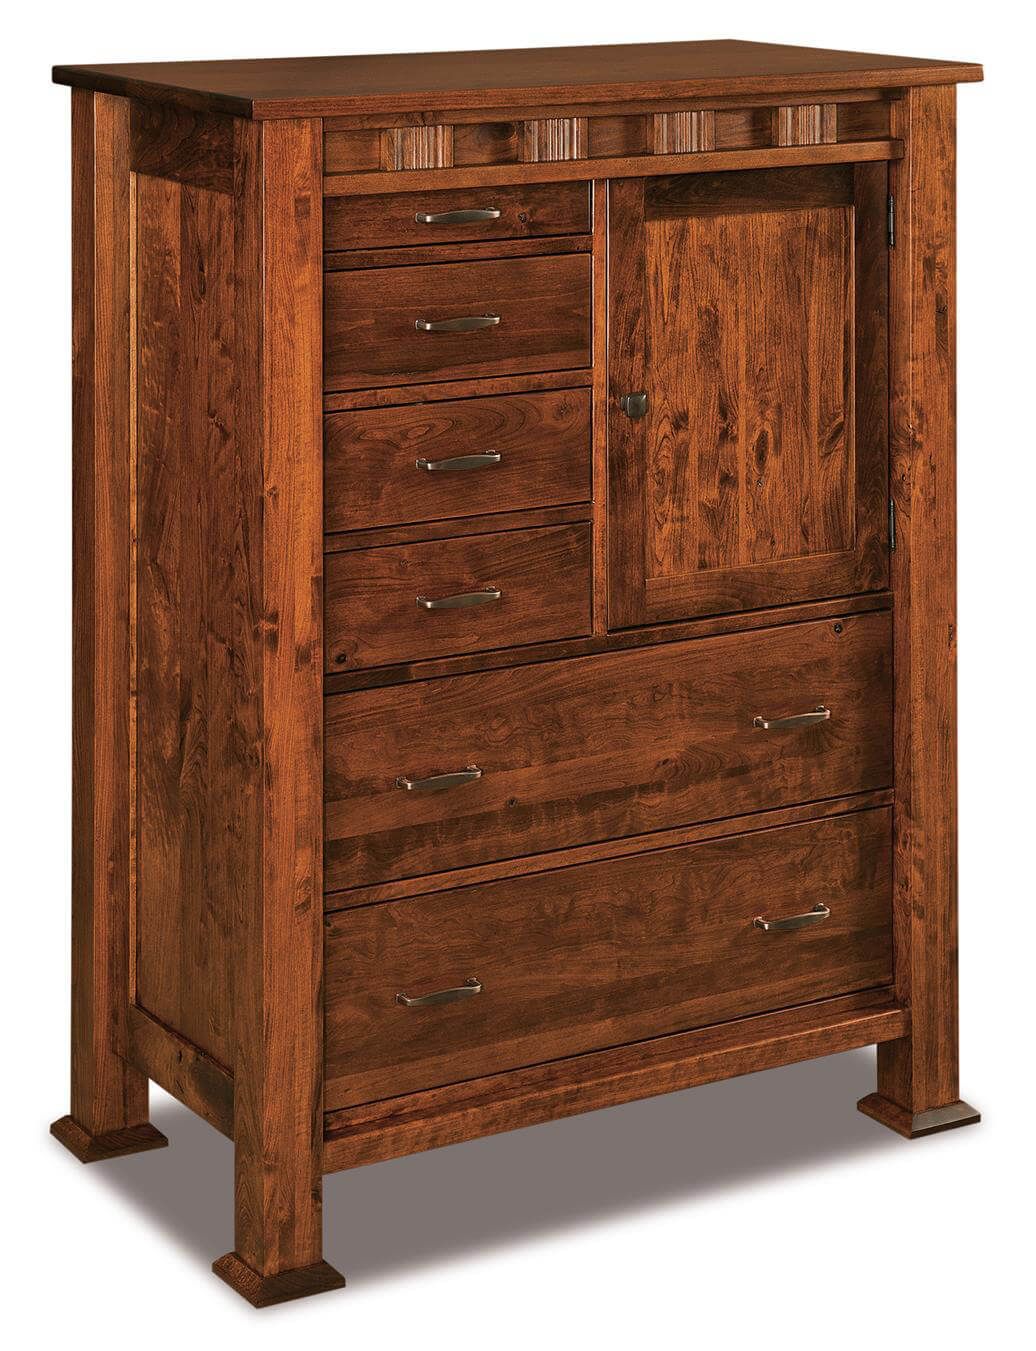 Tuskegee Bachelor's Chest